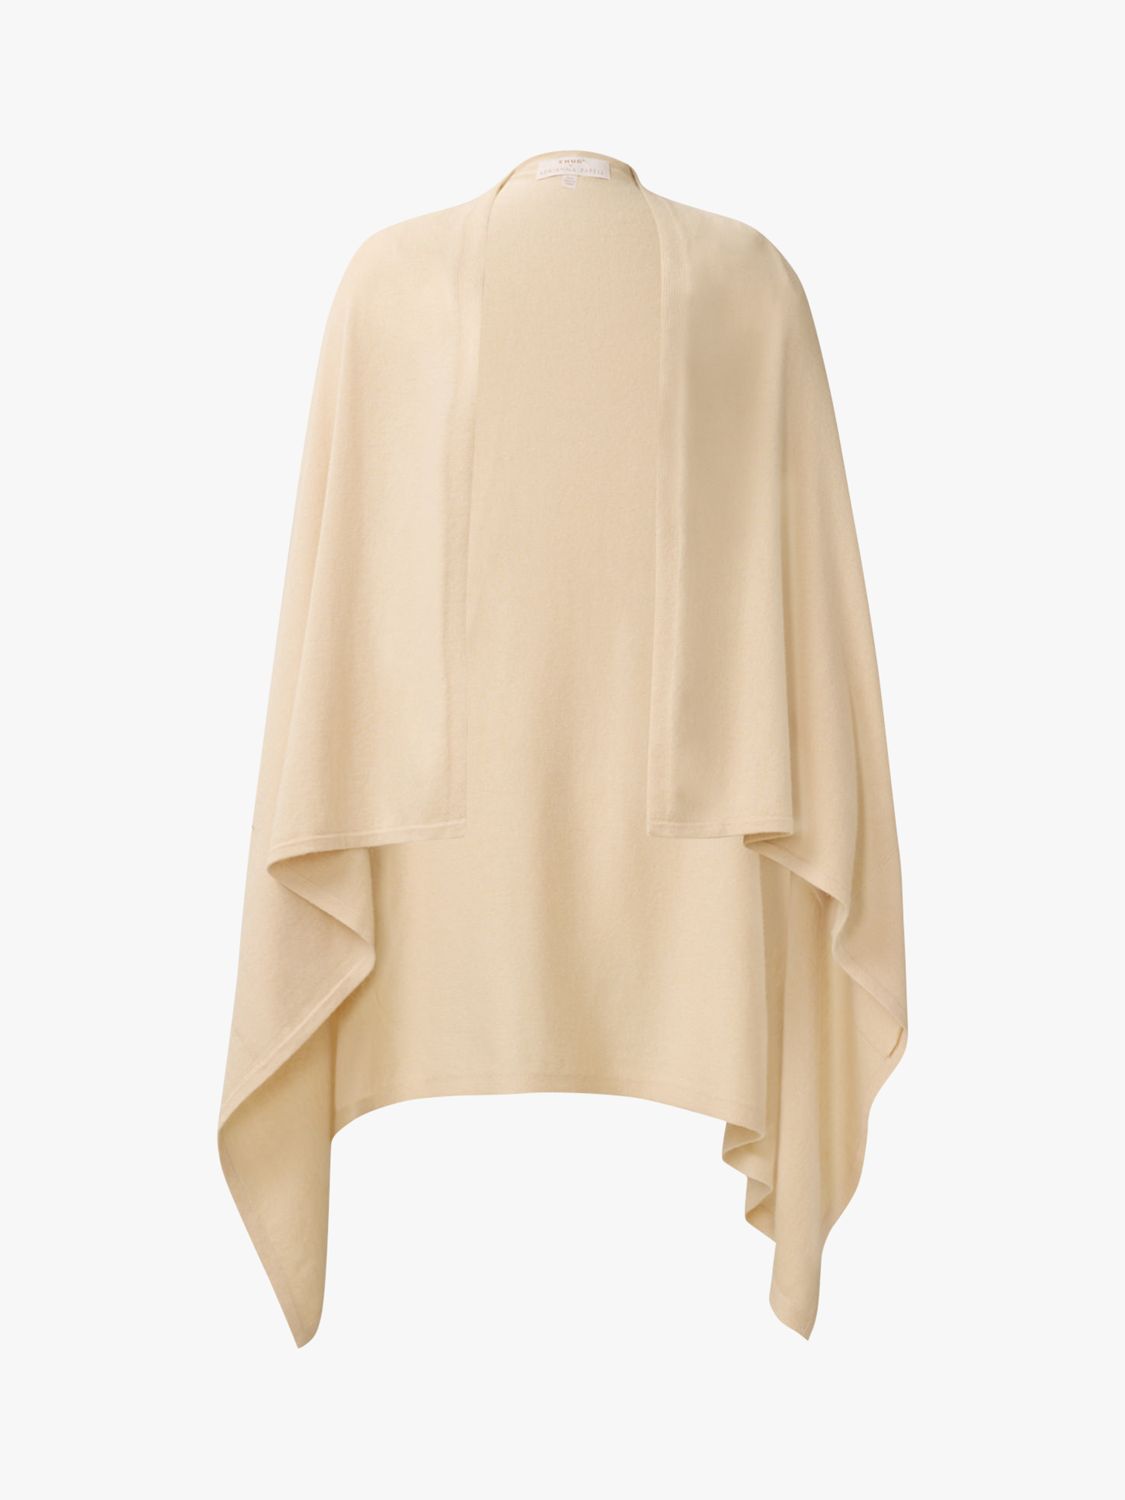 Adrianna Papell Classic Solid Cashmere Blend S’HUG® Cardigan Wrap ...